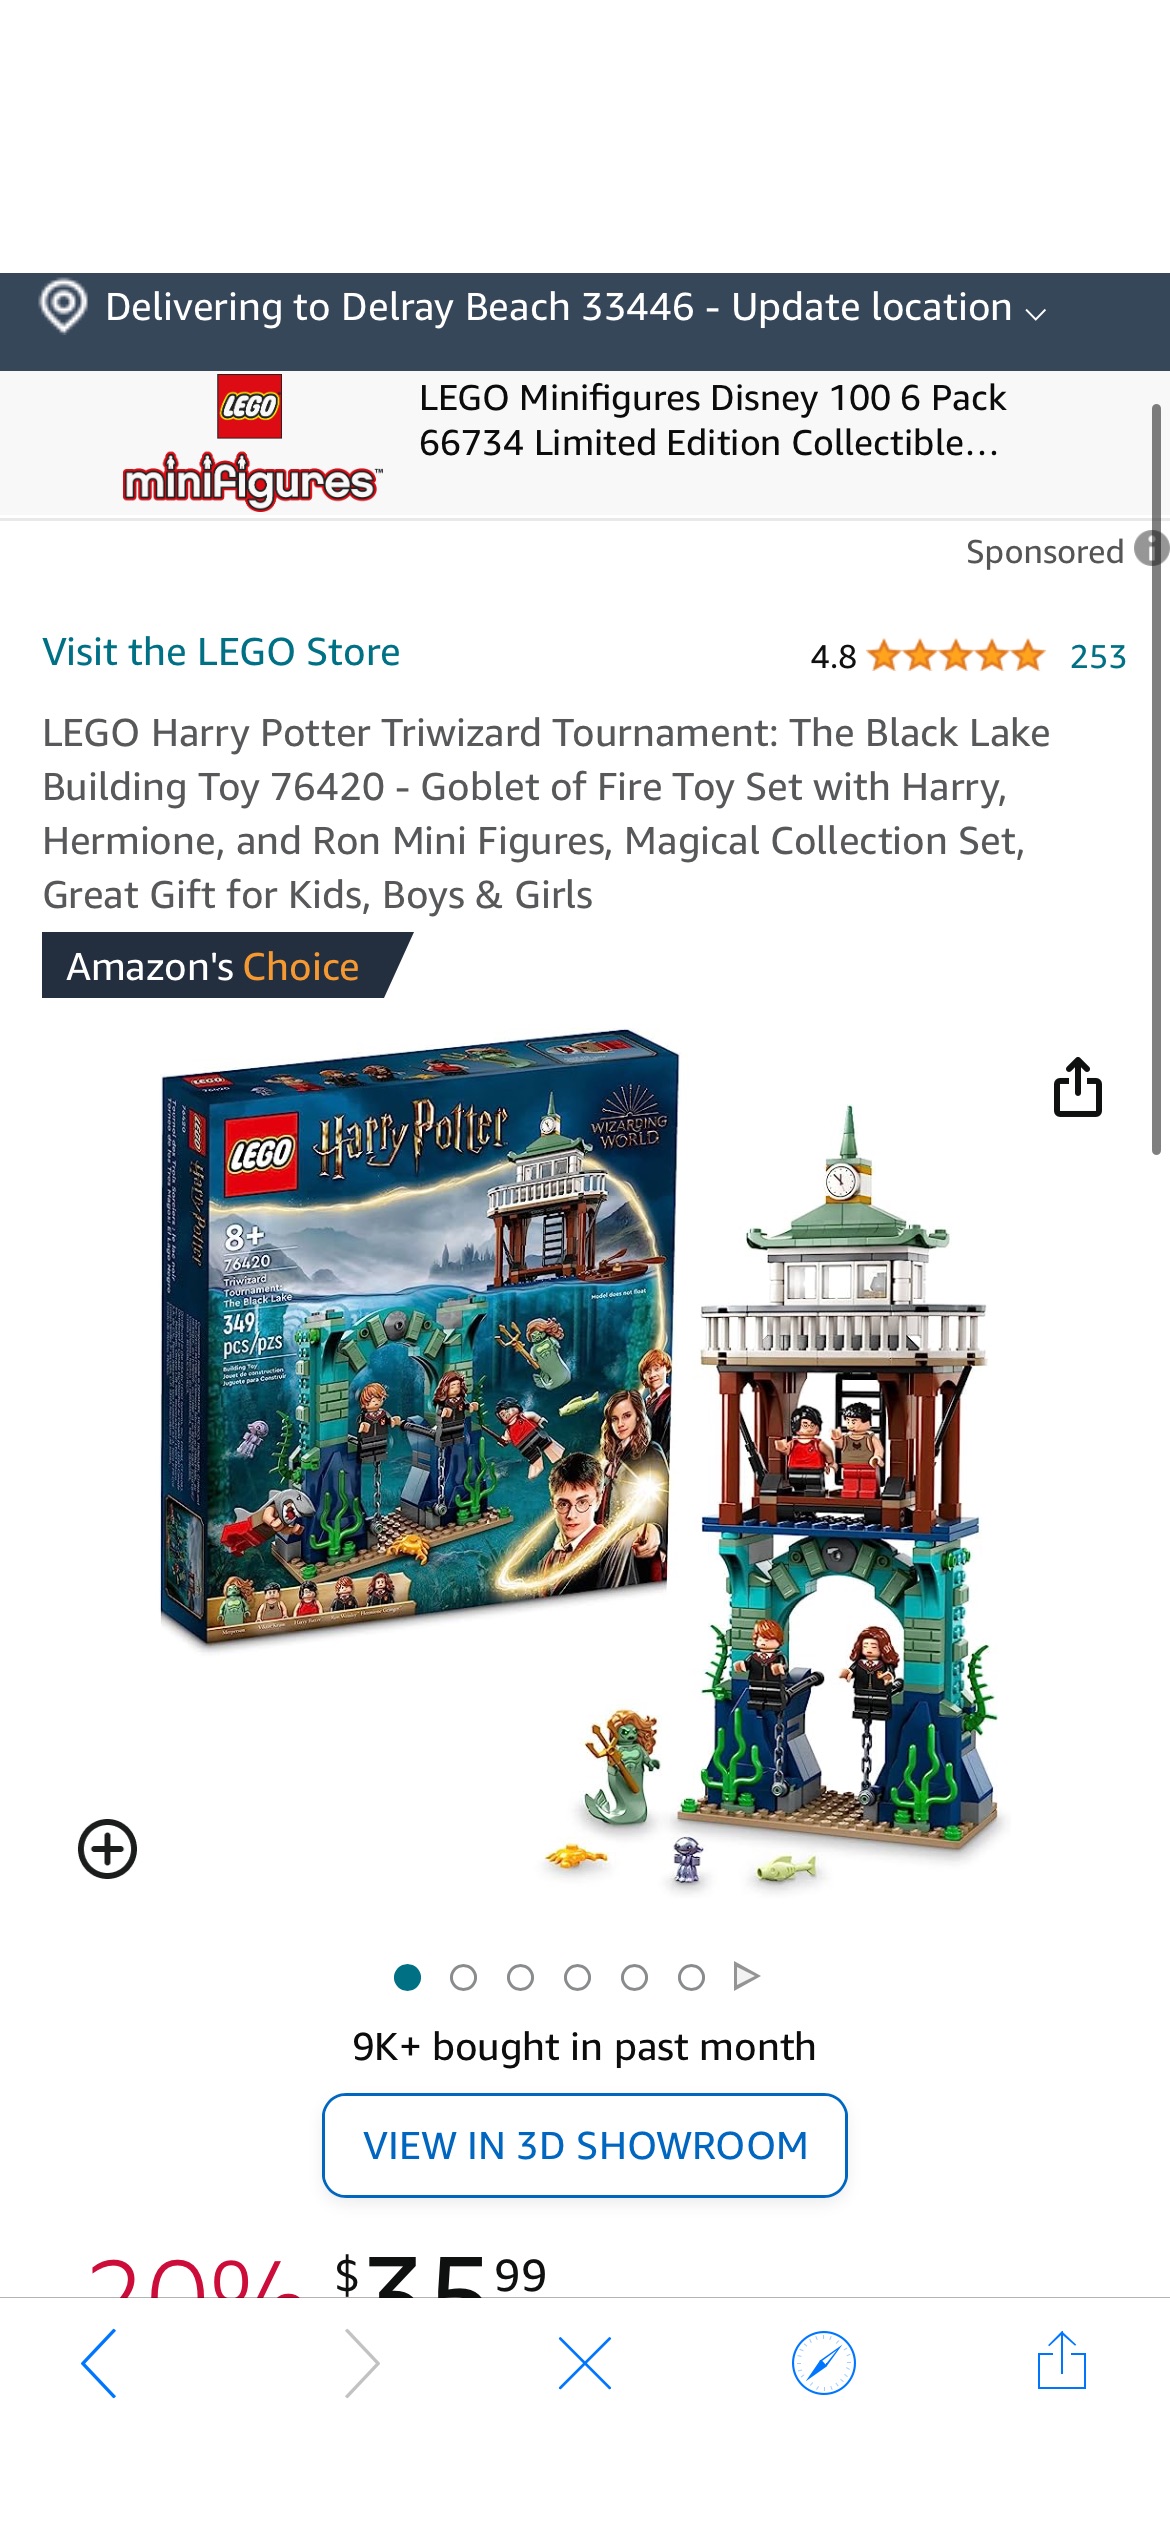 Amazon.com: LEGO Harry Potter Triwizard Tournament: The Black Lake Building Toy 76420 - Goblet of Fire Toy Set with Harry, Hermione, and Ron Mini Figures, Magical Collection Set, Great Gift for Kids, 